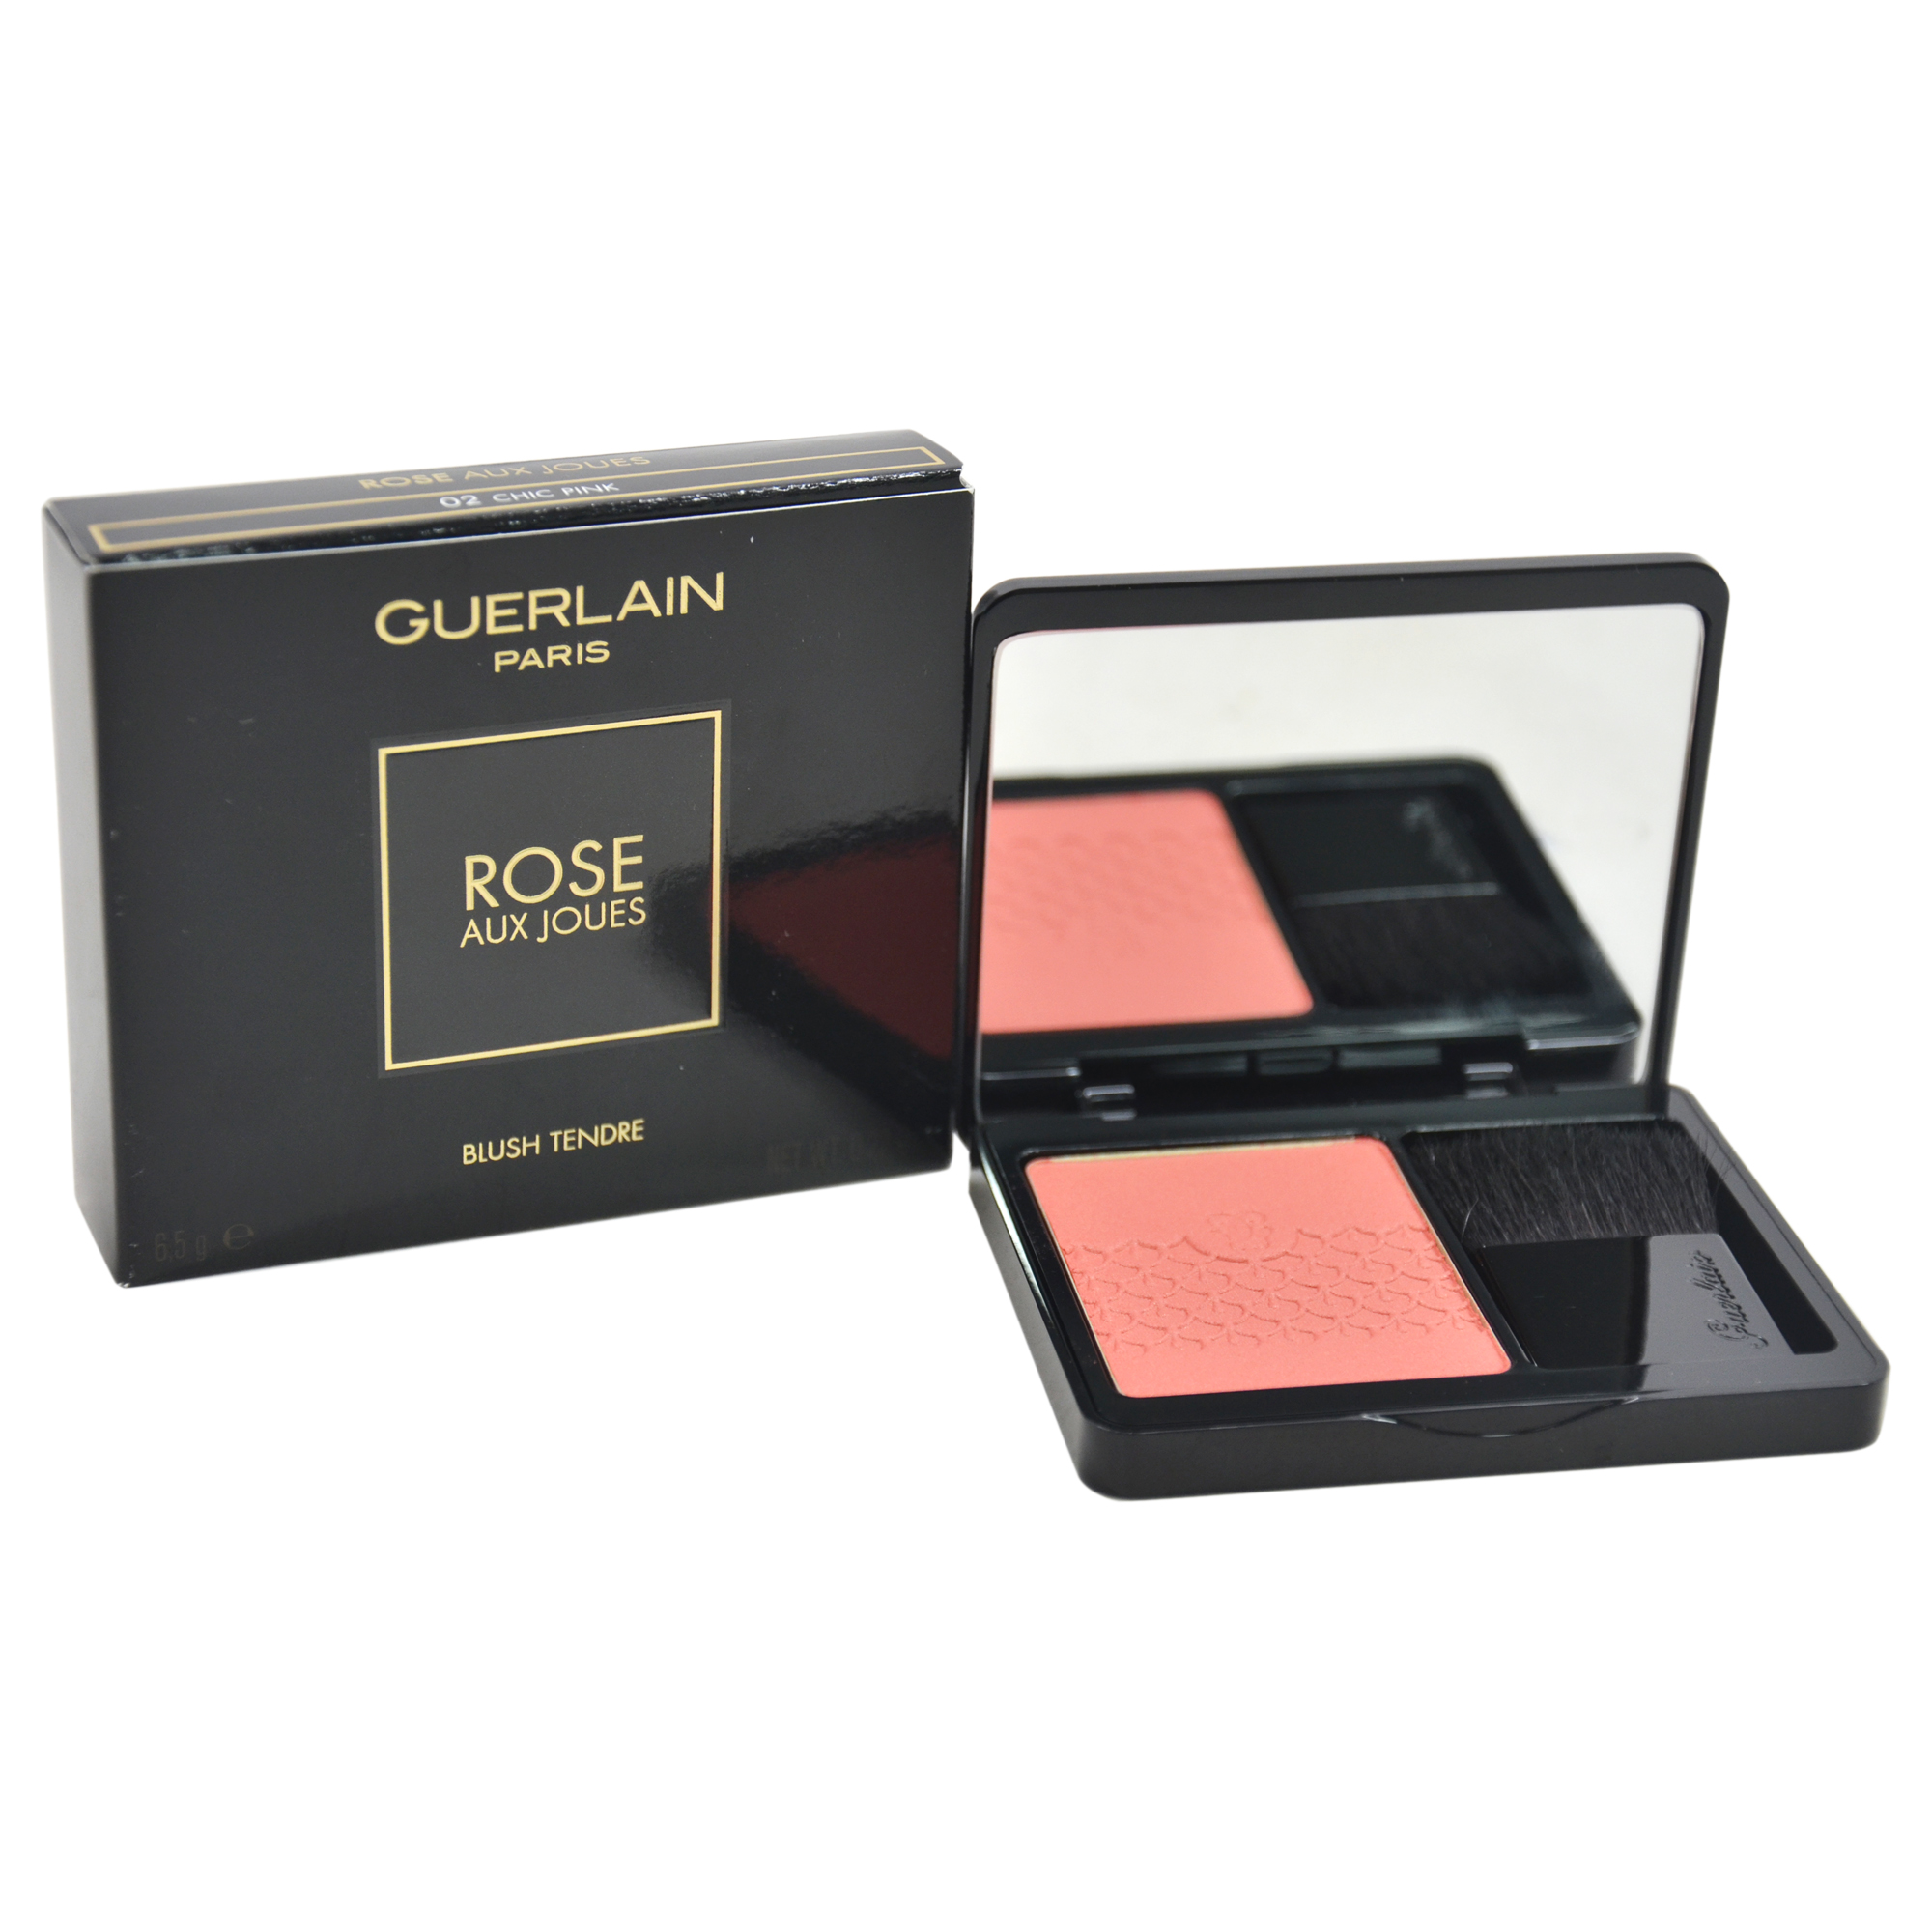 Rose Aux Joues Tender Blush # 02 Chic Pink by Guerlain for Women - 0.22 oz Blush - image 1 of 3